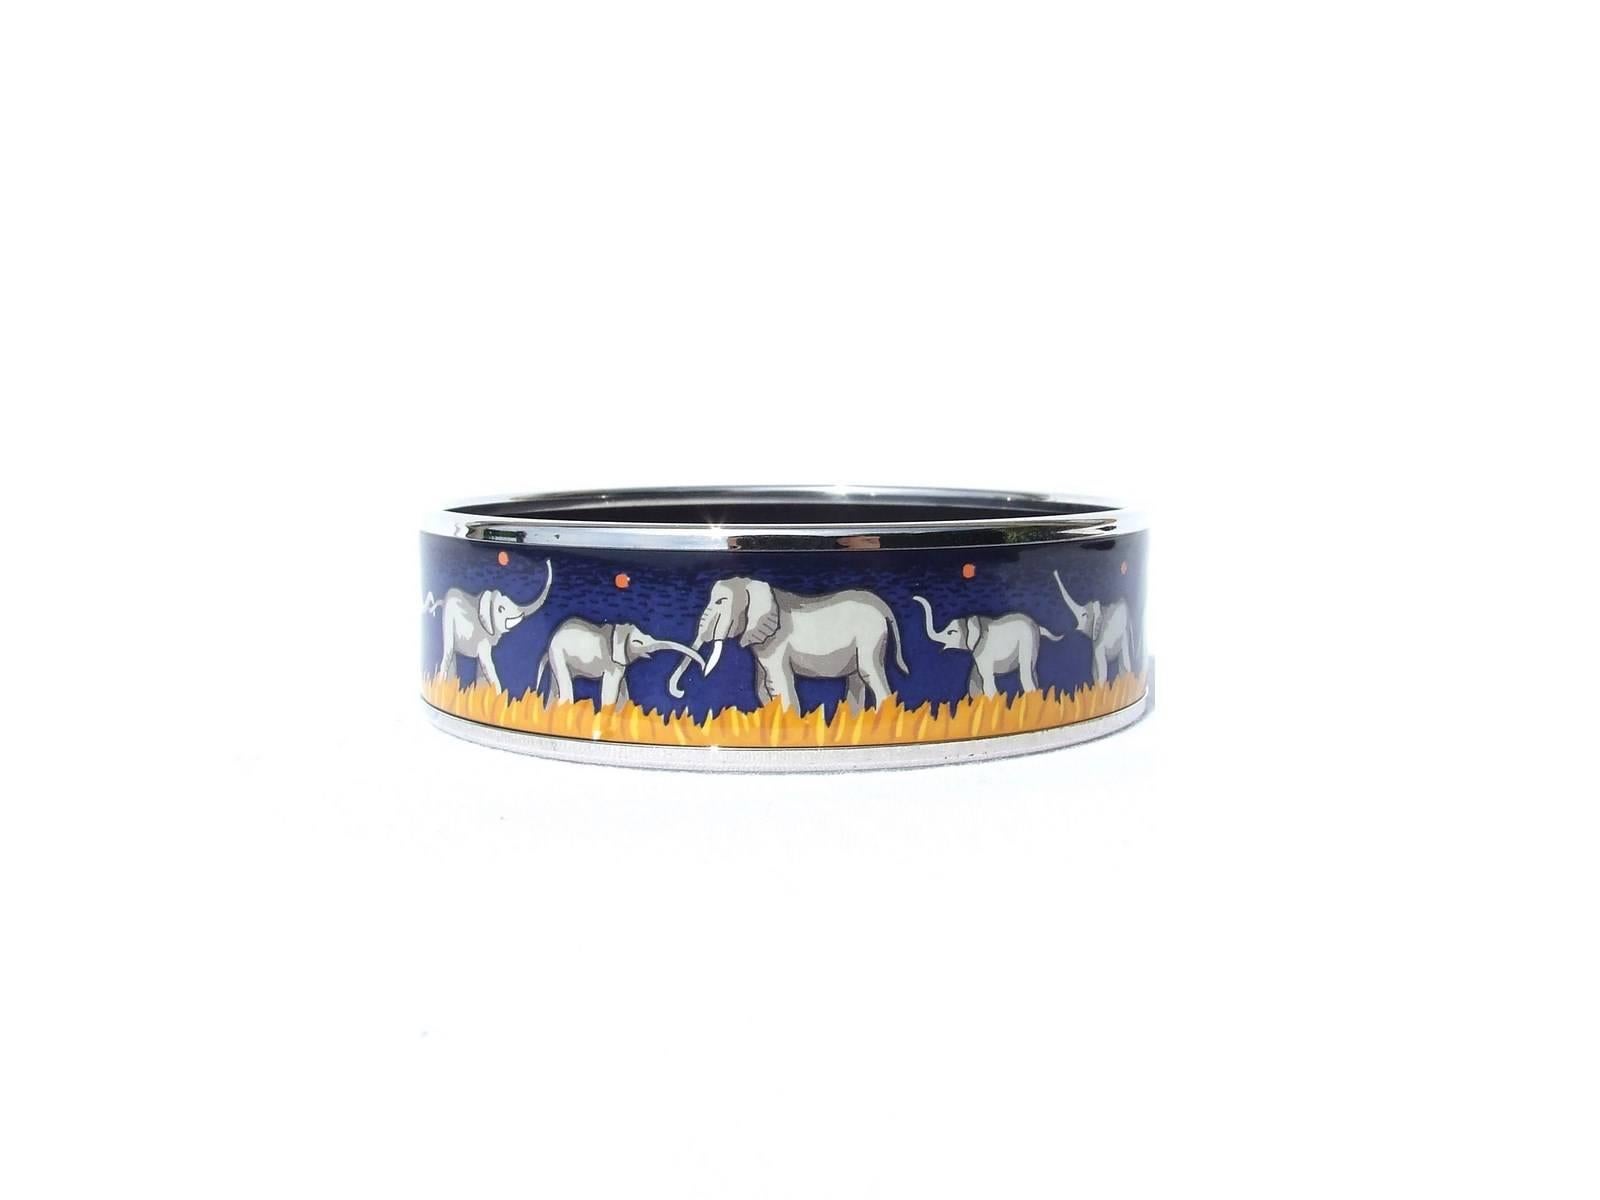 Beautiful Authentic Hermes Bracelet

Pattern: Elephants Grazing

RARE bracelet, hard to find !

Made in Austria + H
 
Made of Printed Enamel and Palladium Plated Hardware (Silver-tone)

Colors: Blue background with yellow polka dots, grey elephants